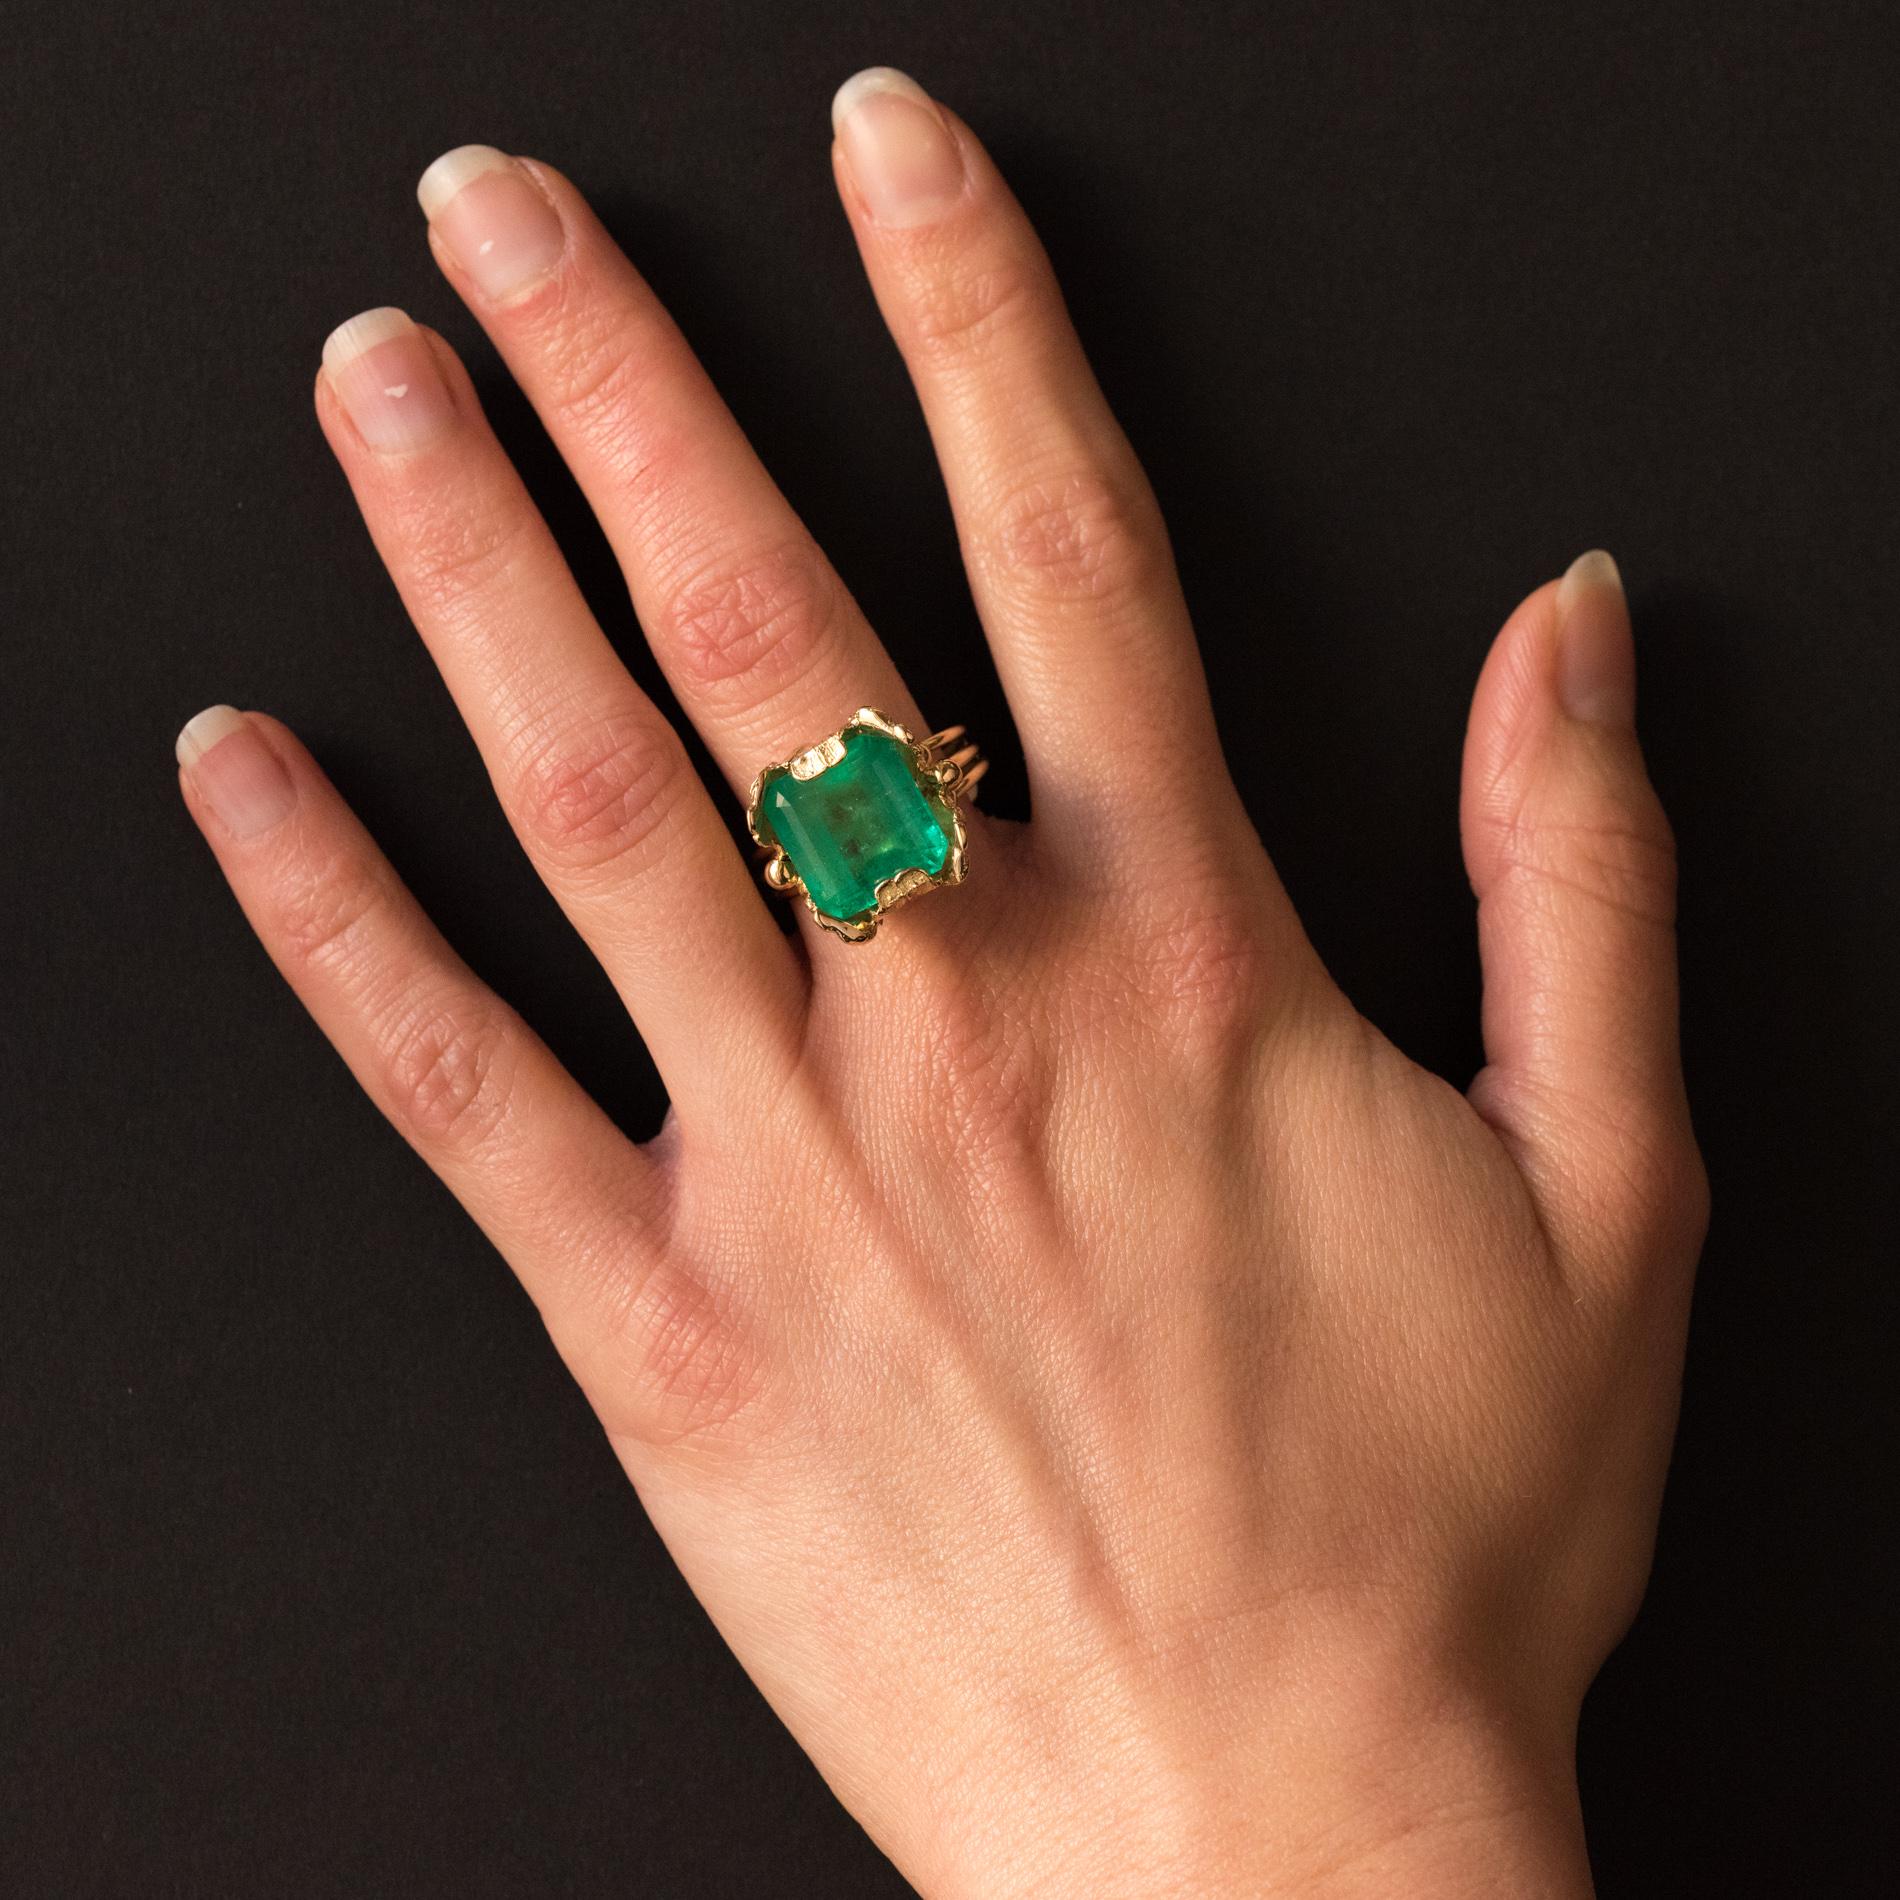 Ring in 18 karat yellow gold, owl hallmark.
Important retro ring, it consists of a setting made of finely crafted and gently chiseled leaves that hold within them an emerald-cut emerald of a bright and intense green color.
Weight of the emerald: